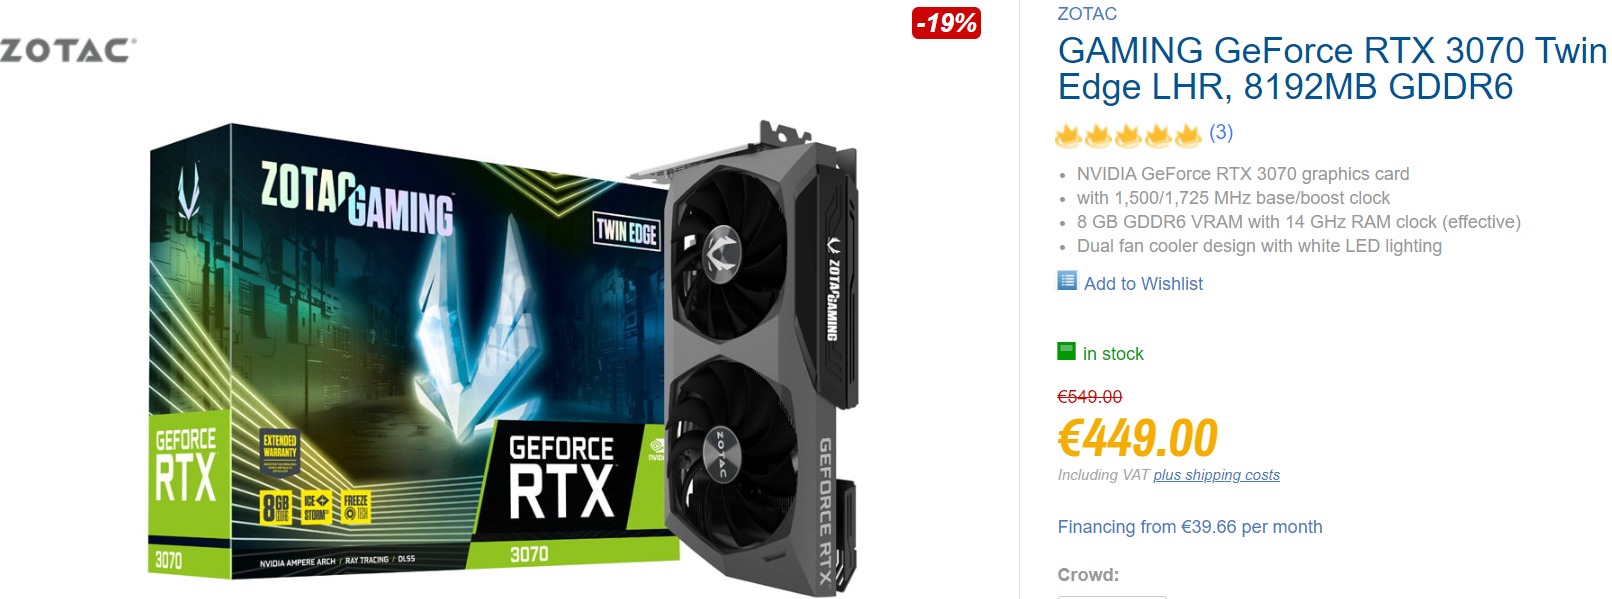 NVIDIA RTX 4080 price drops below MSRP in Europe thanks to cheaper US  Dollar - VideoCardz.com : r/nvidia